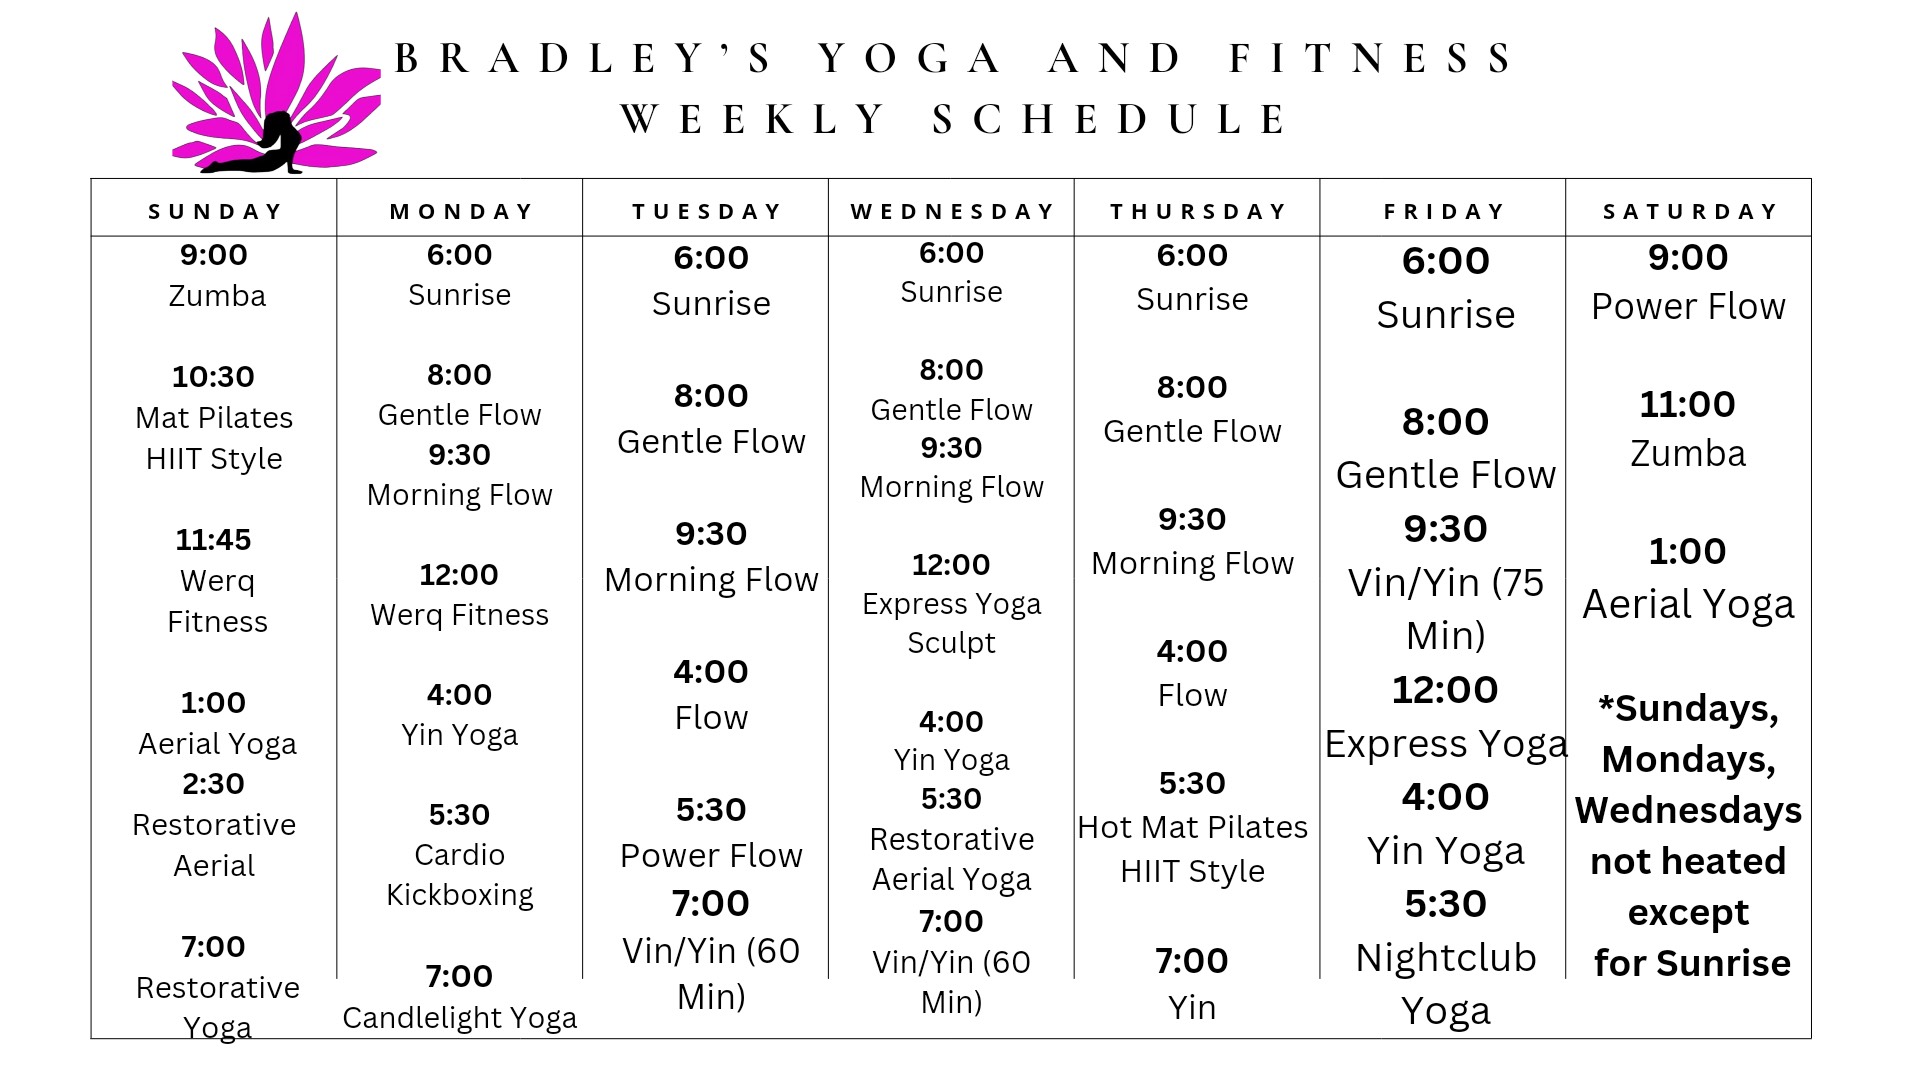 Bradley's Yoga and Fitness Weekly Schedule